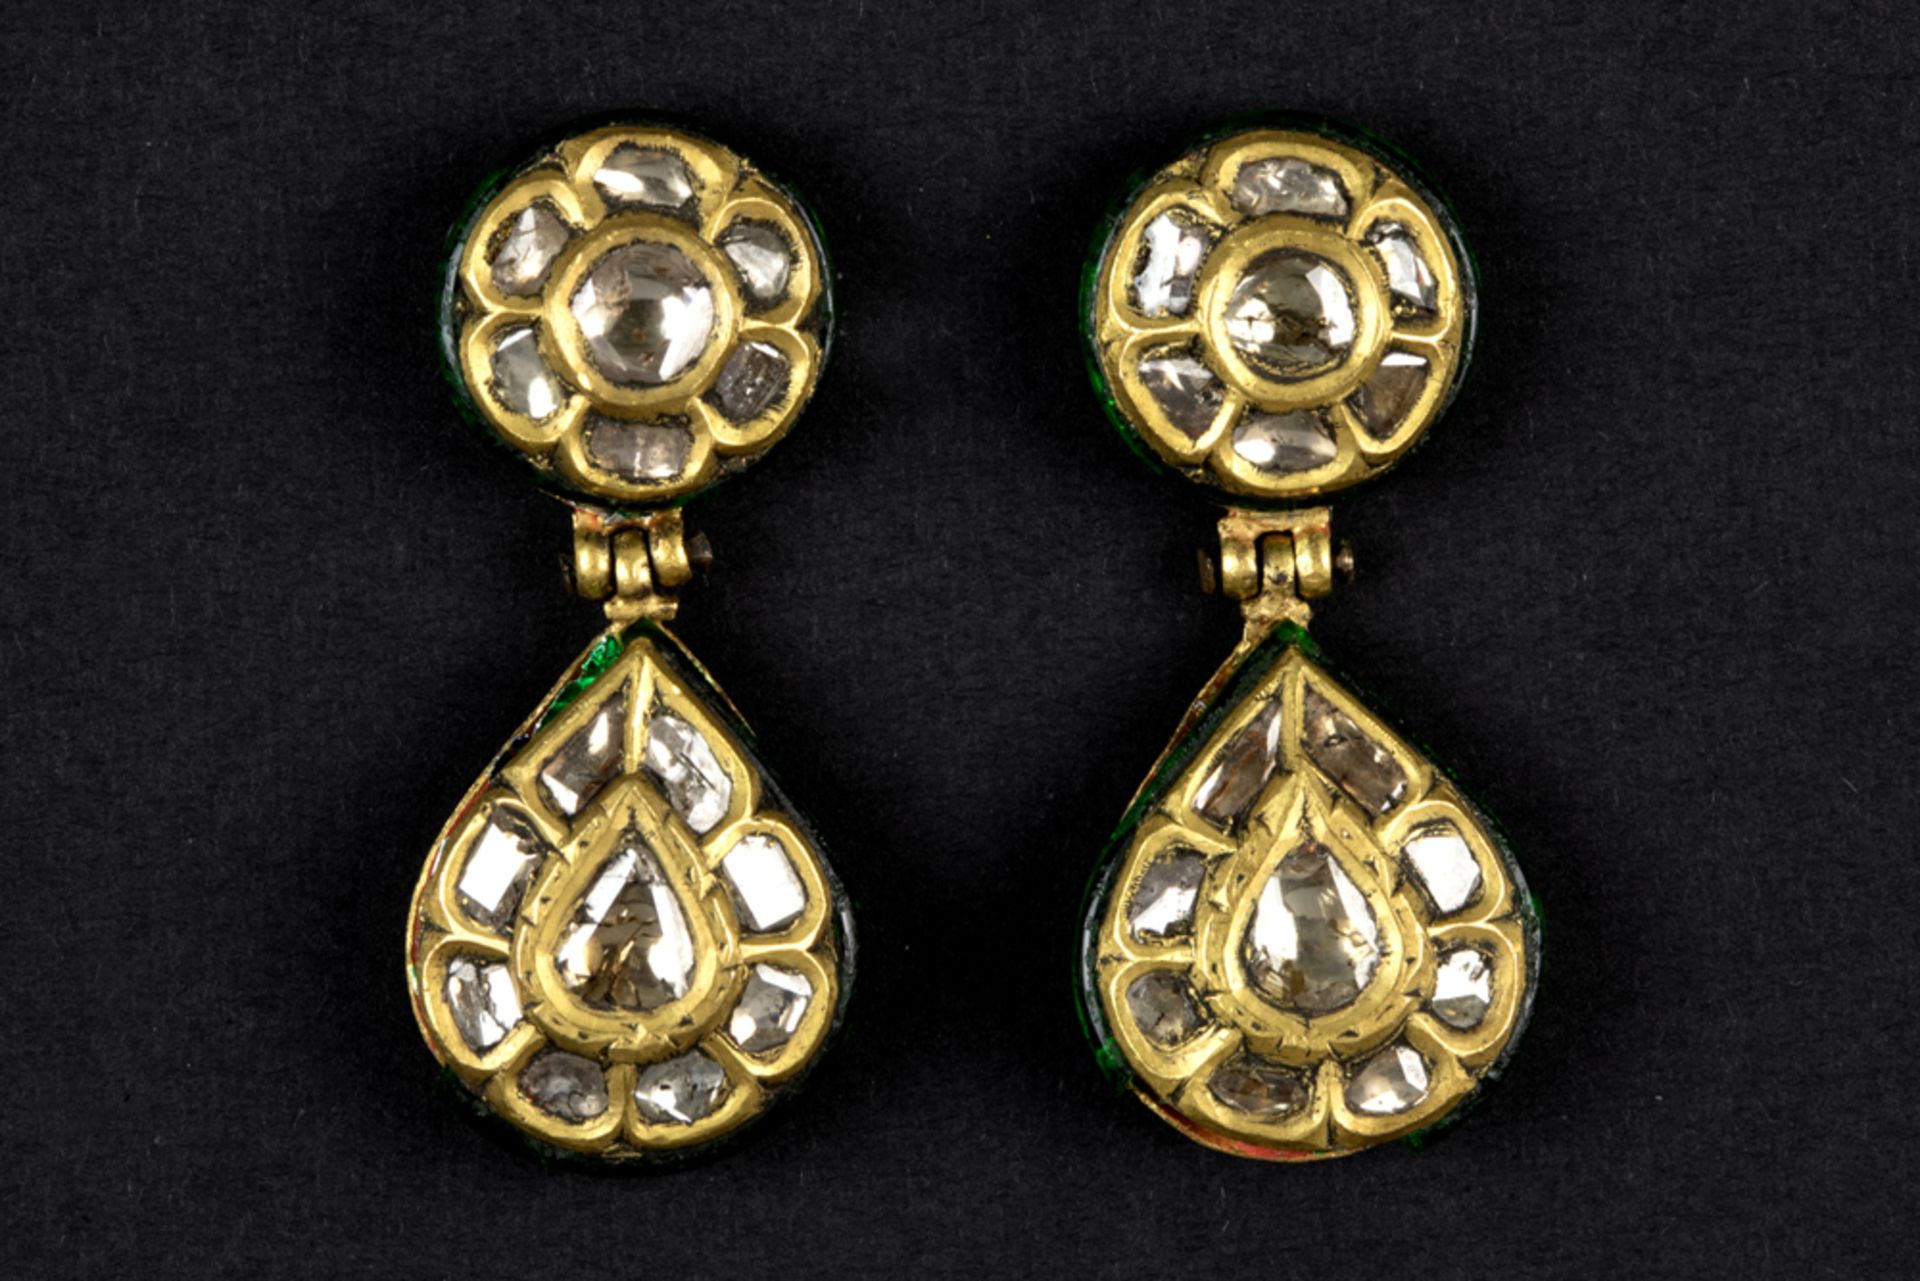 pair of antique North Indian "Kundan" earrings in partially lacquered yellow gold and set with typic